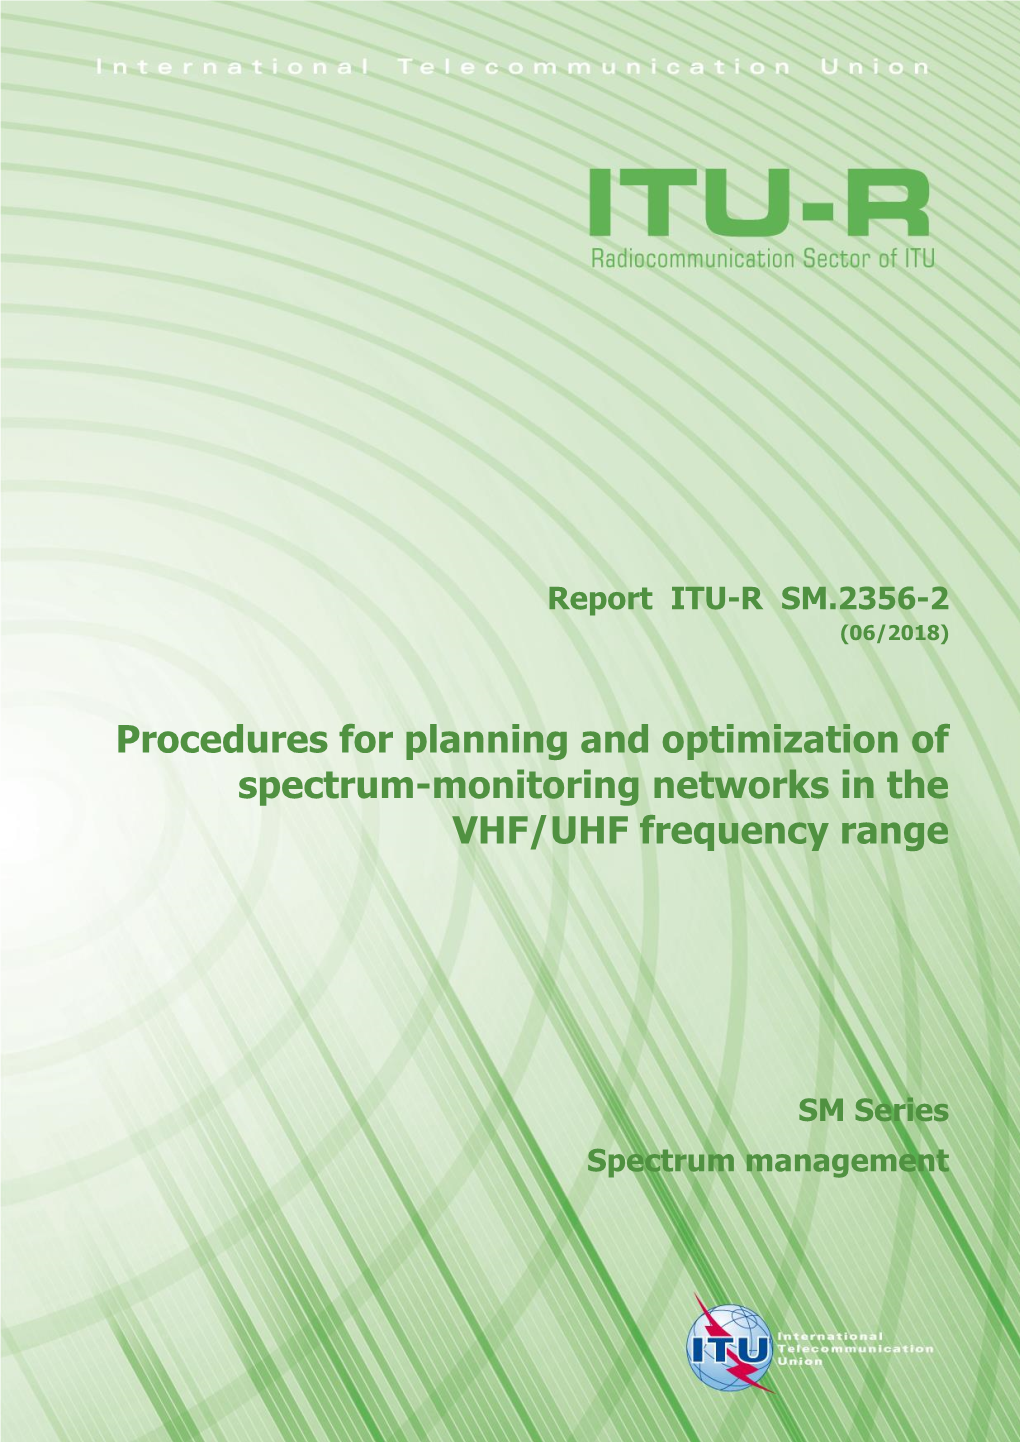 Procedures for Planning and Optimization of Spectrum-Monitoring Networks in the VHF/UHF Frequency Range